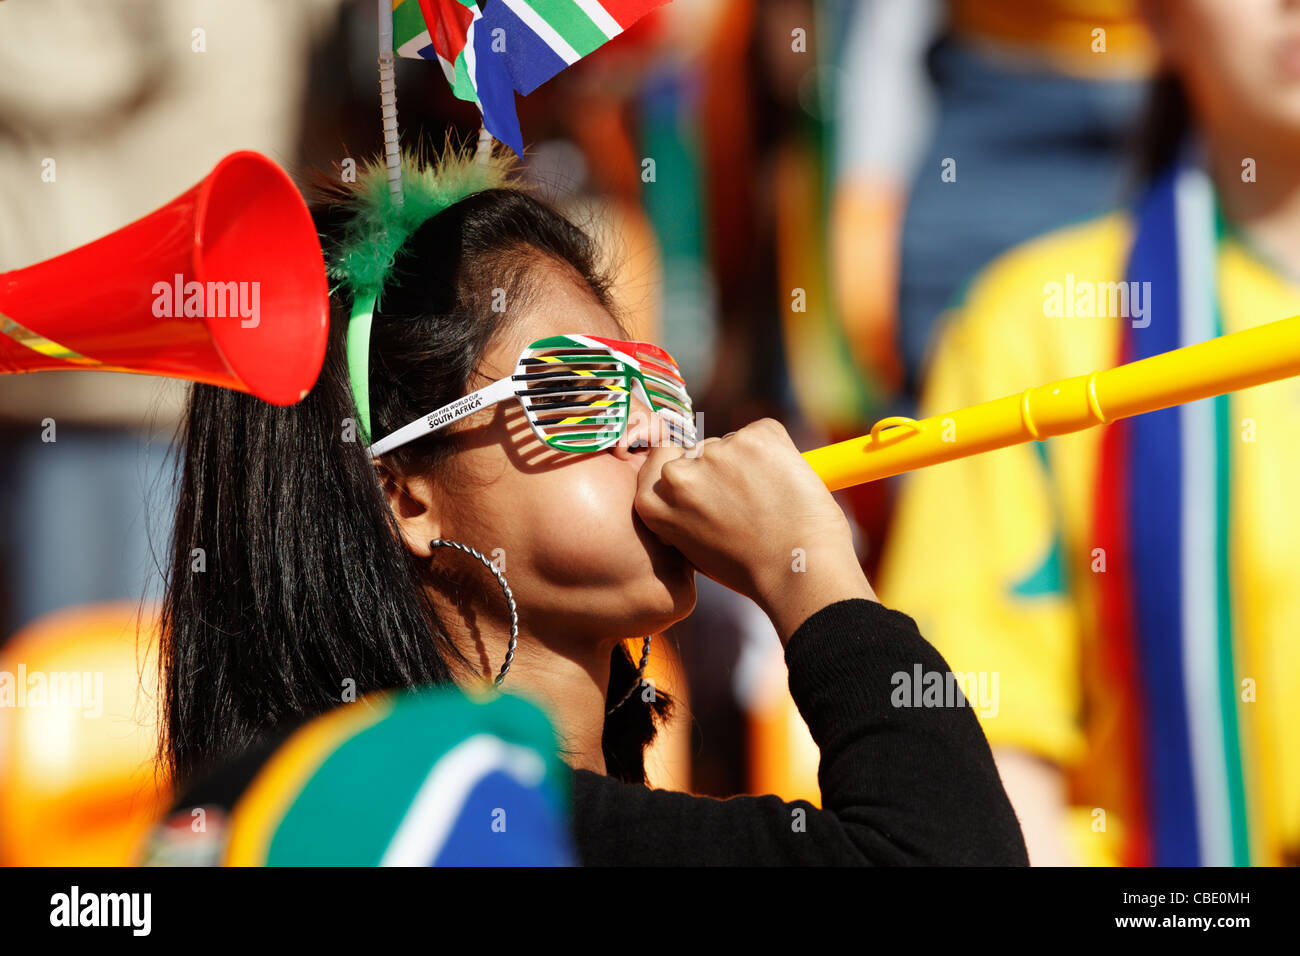 https://c8.alamy.com/comp/CBE0MH/a-south-africa-supporter-blows-a-vuvuzela-at-the-opening-match-of-CBE0MH.jpg